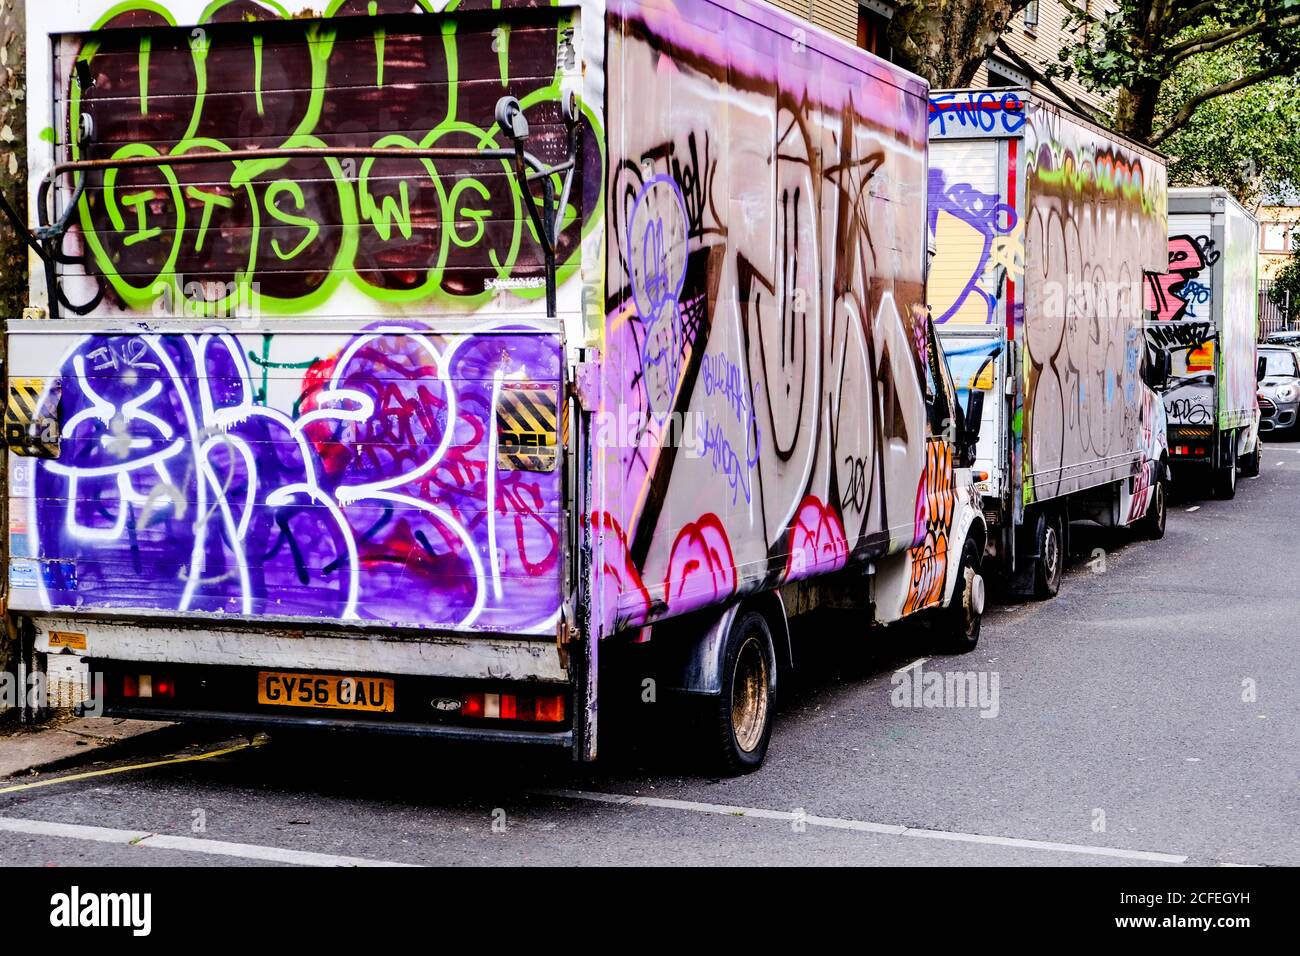 Graffiti Painted Vans Parked In Camden Market London, UK, With No People Stock Photo